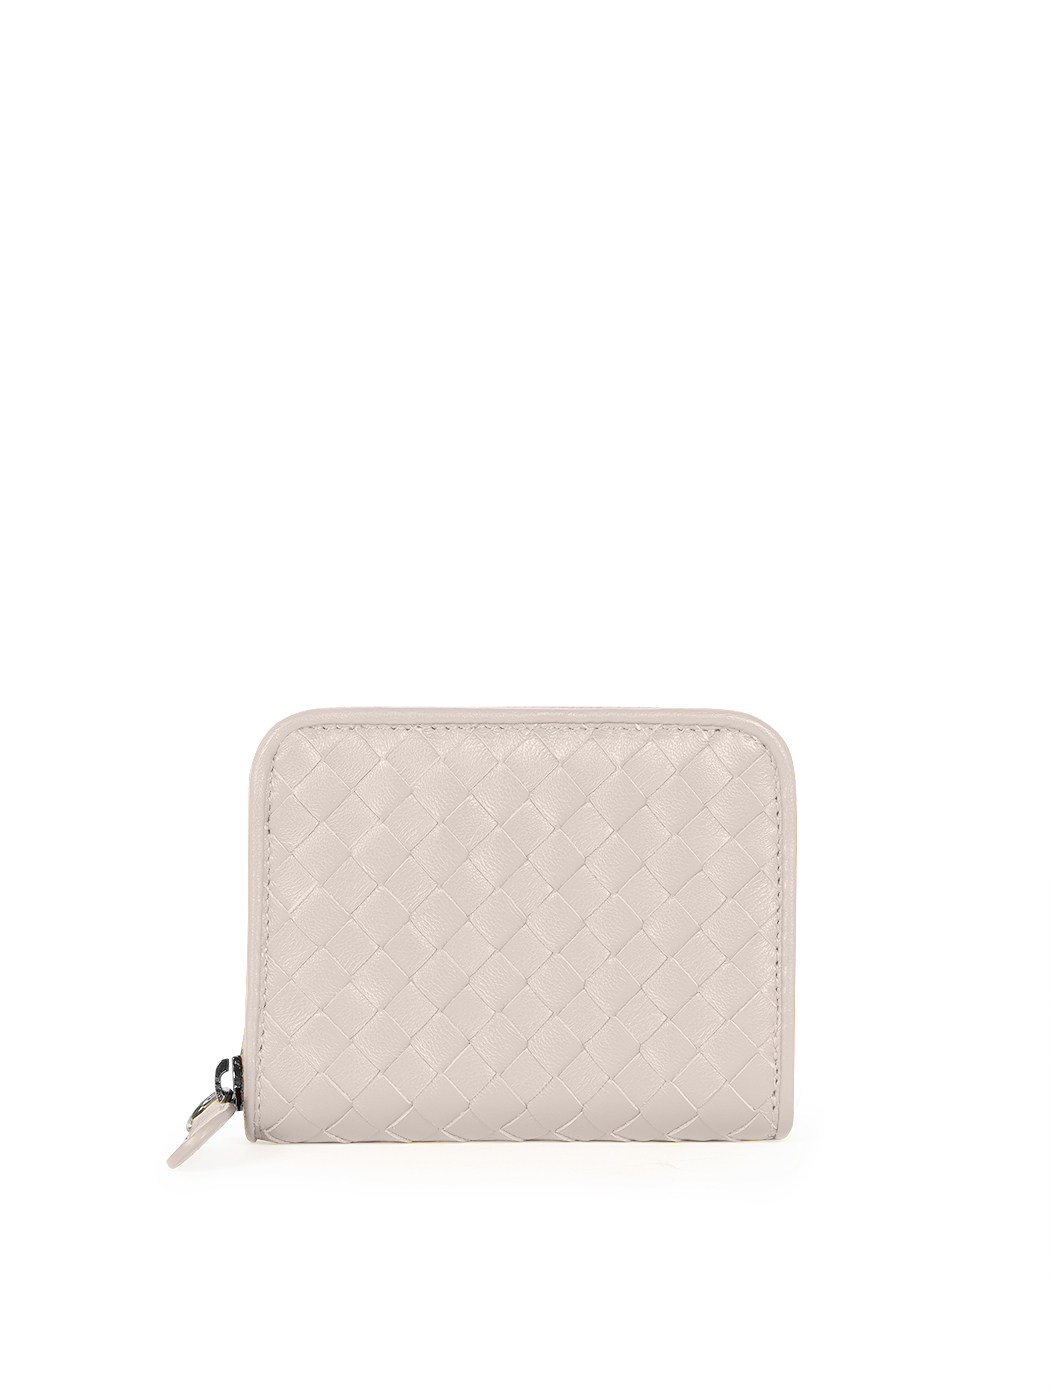 Compact zip-around wallet in powder pink woven leather